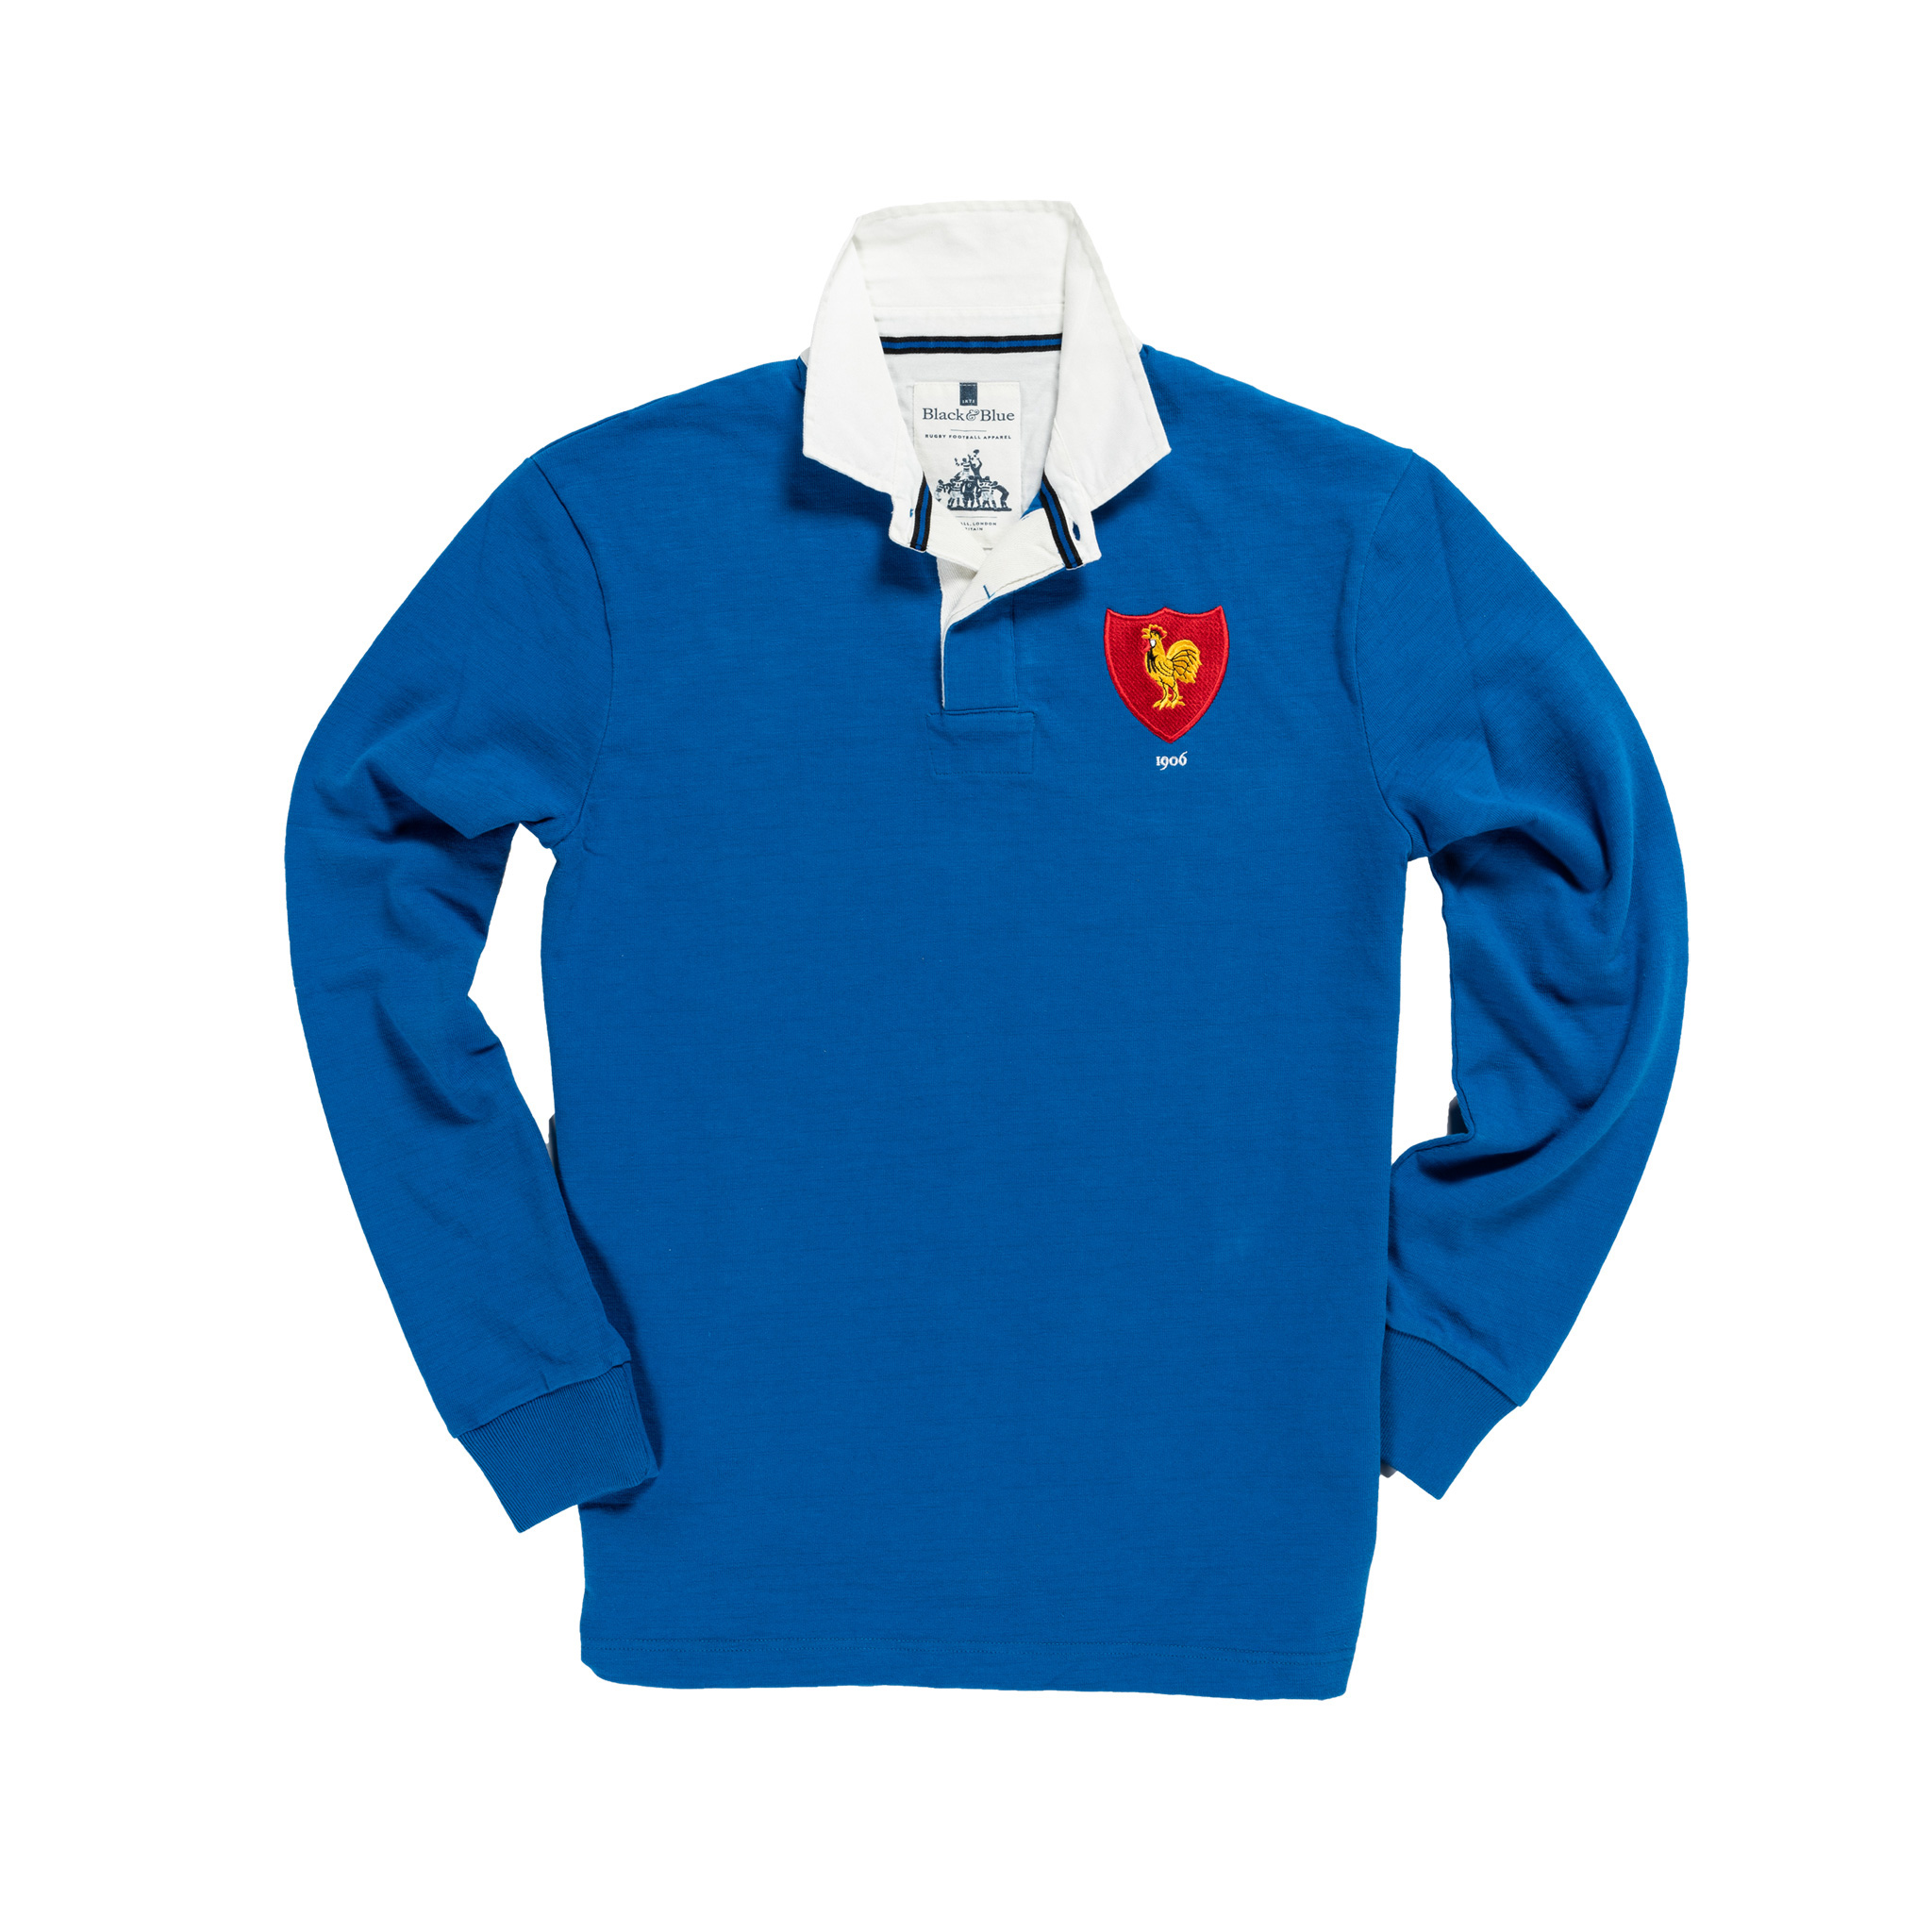 Mens Vintage France Rugby Shirt Long Sleeve Rooster Personalised